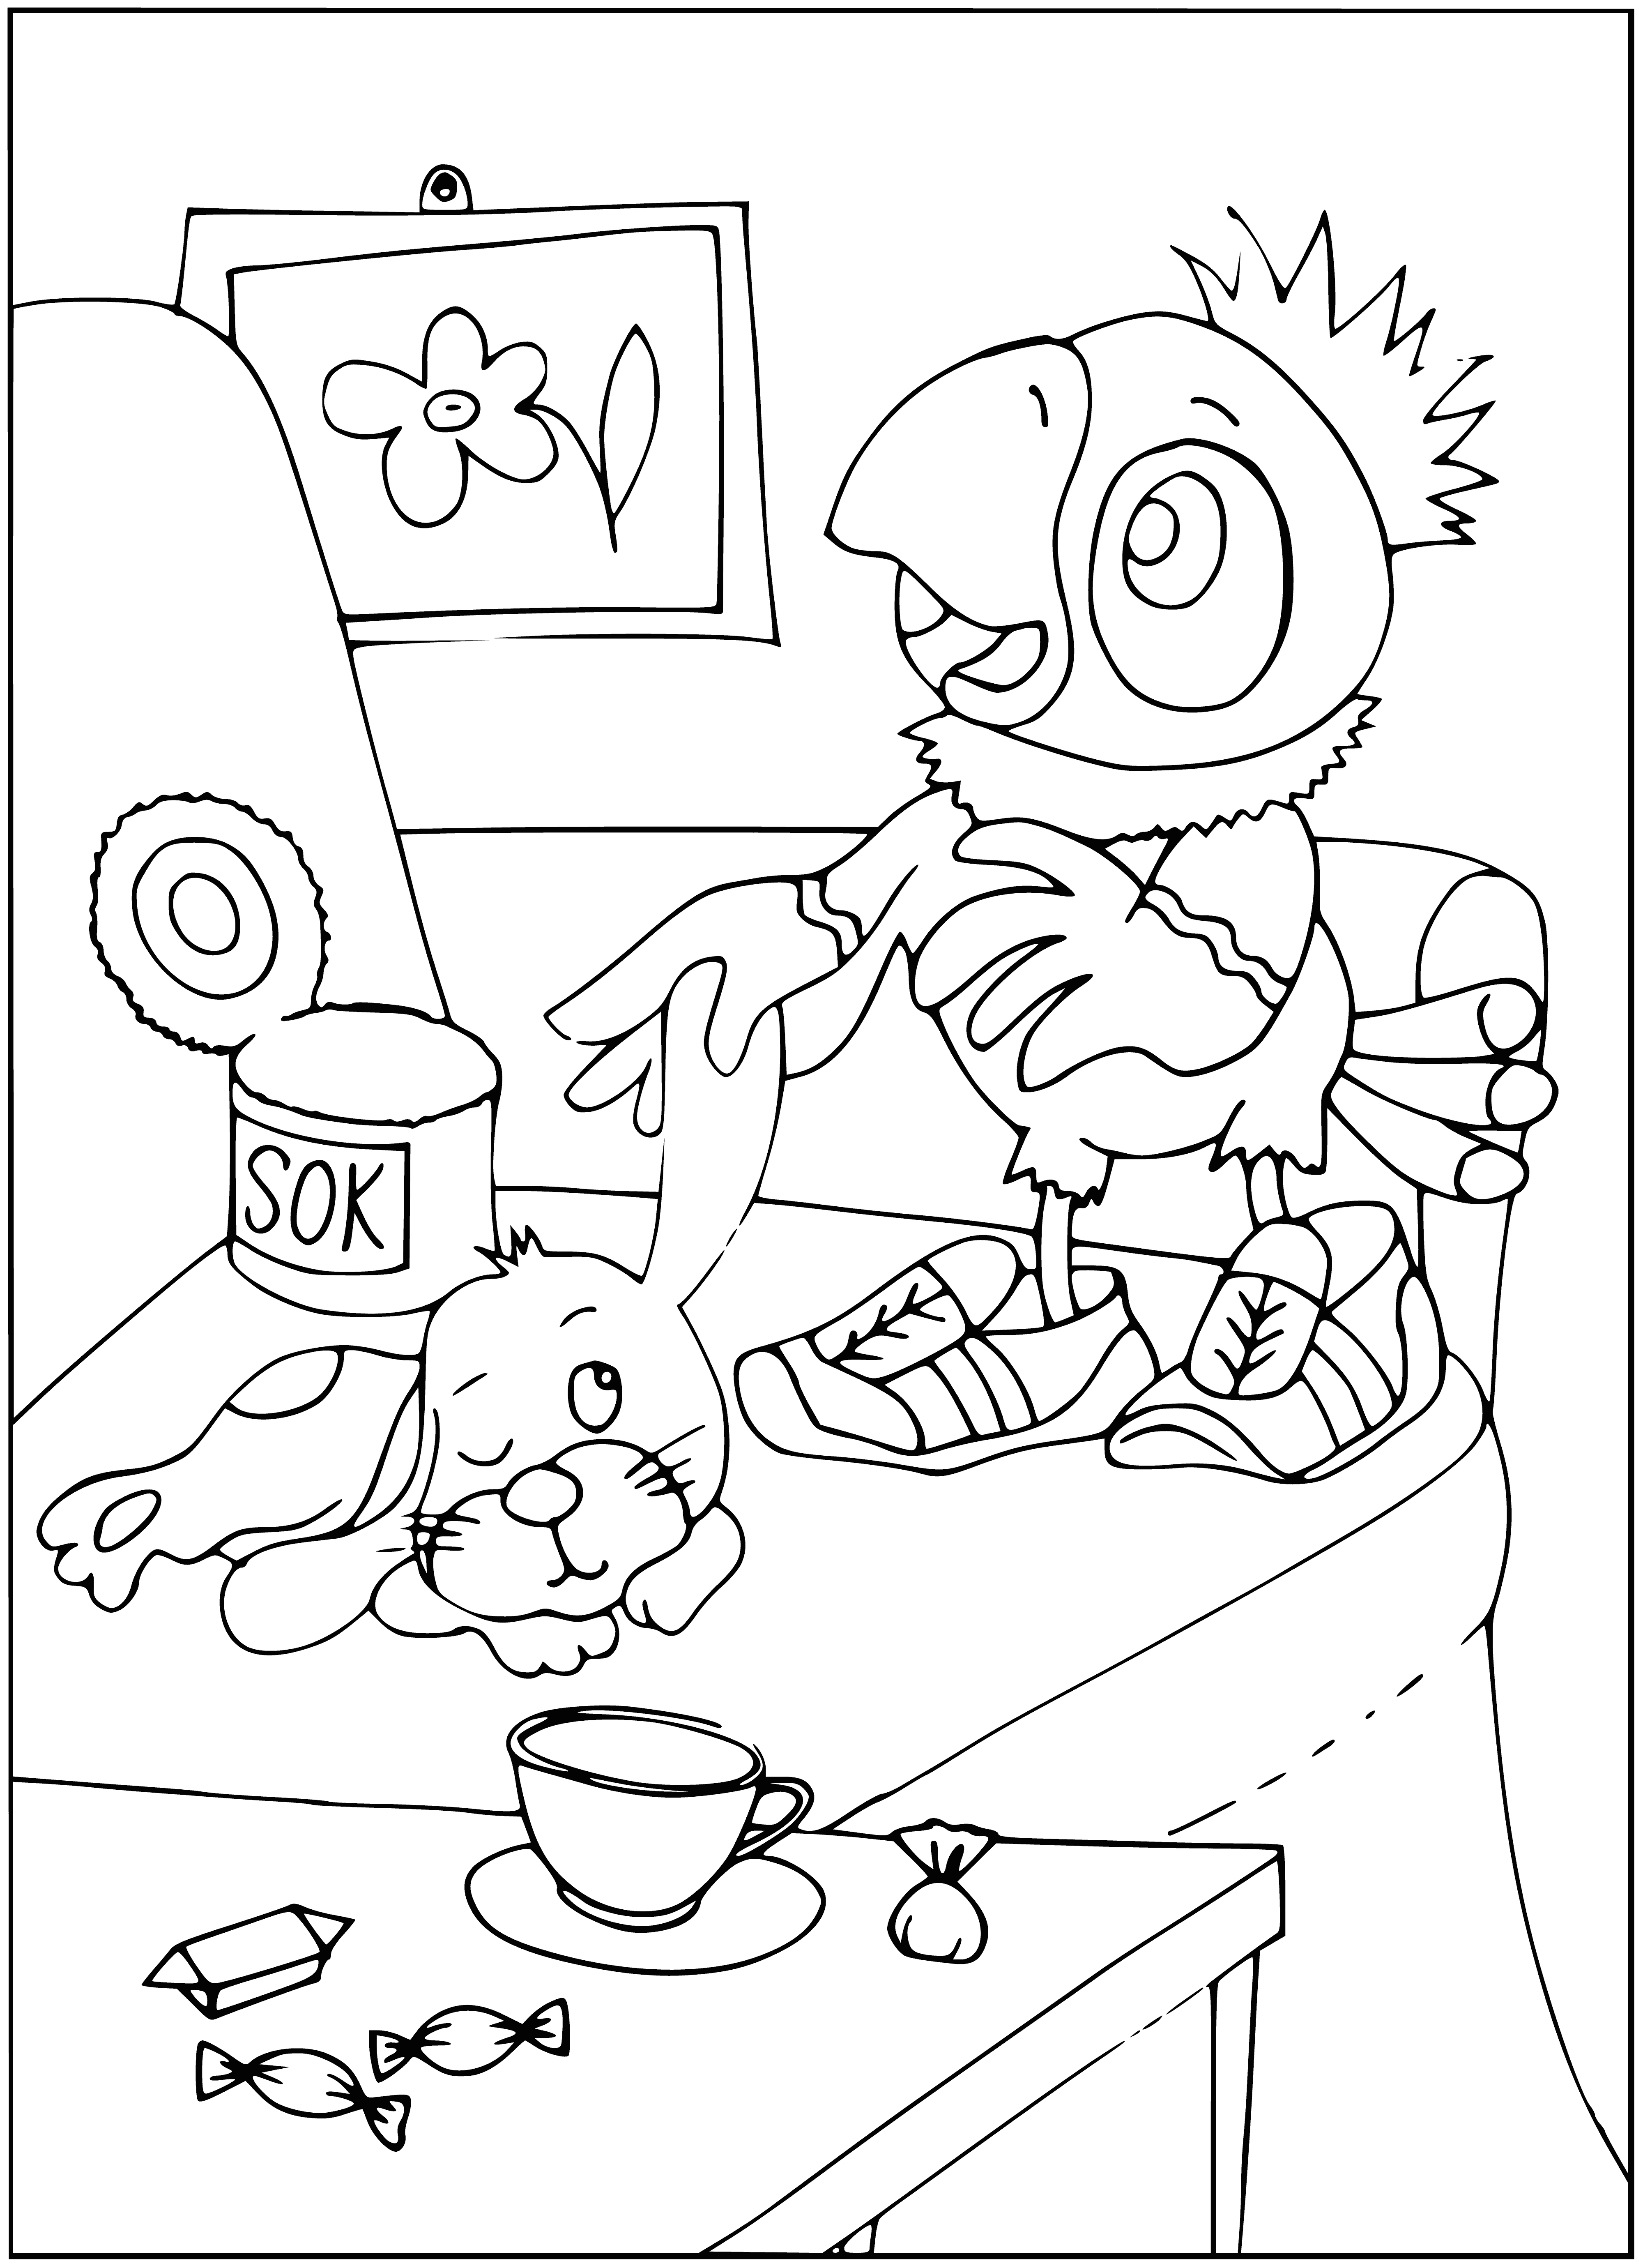 coloring page: Parrot and pup friends: Kesha and pup stand together with wings and paw outstretched.